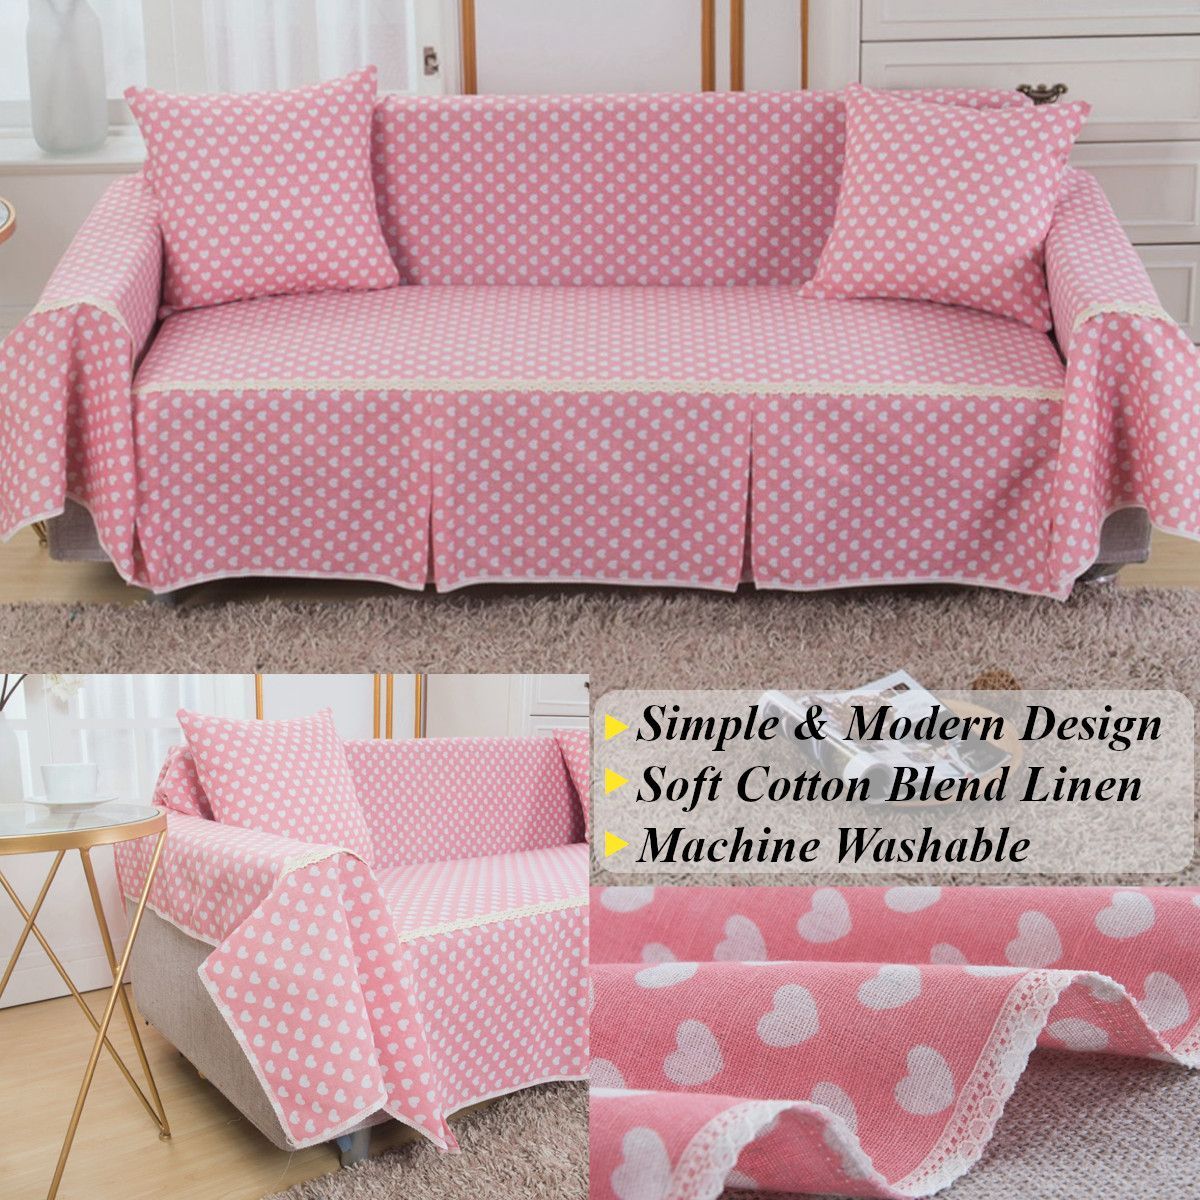 1-4-Seat-Sofa-Seat-Covers-Couch-Slipcover-Cotton-Blend-Pet-Dog-Sofa-Cover-Protector-1454804